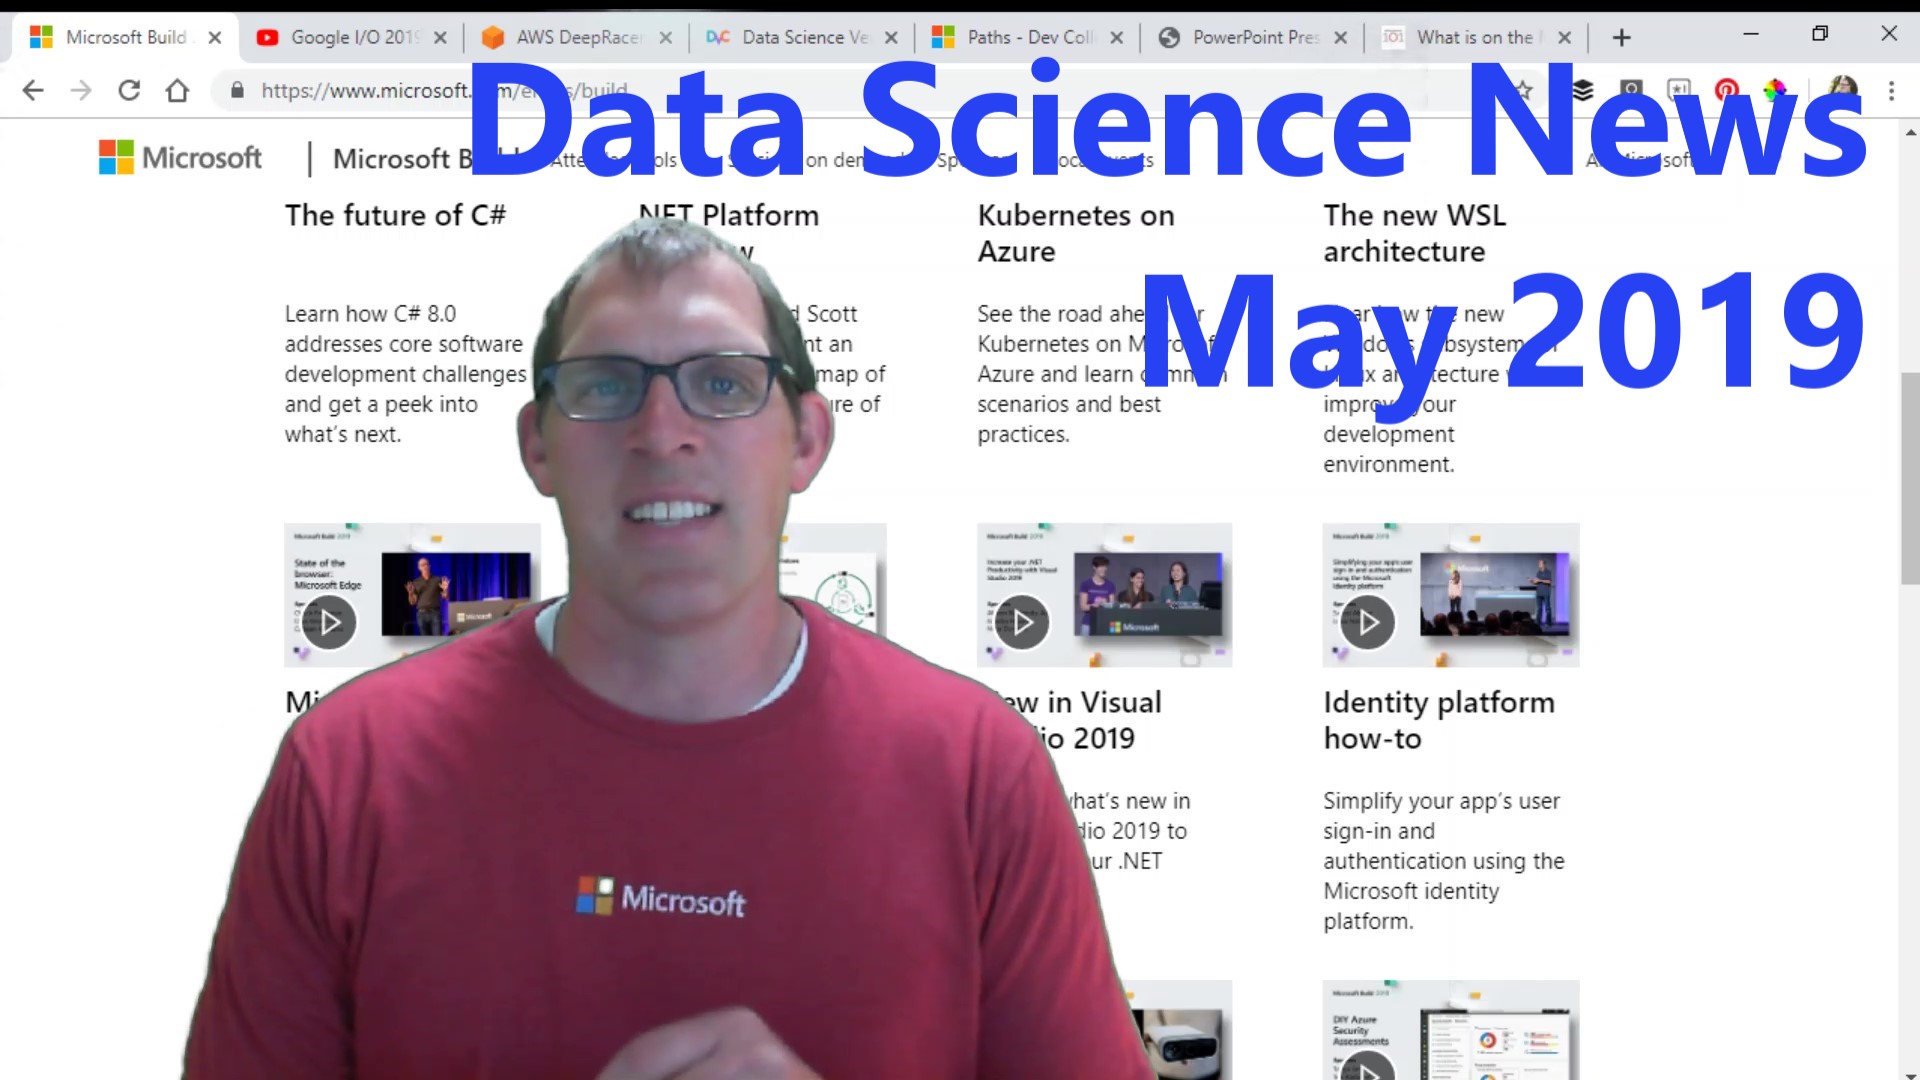 Data Science News for May 2019